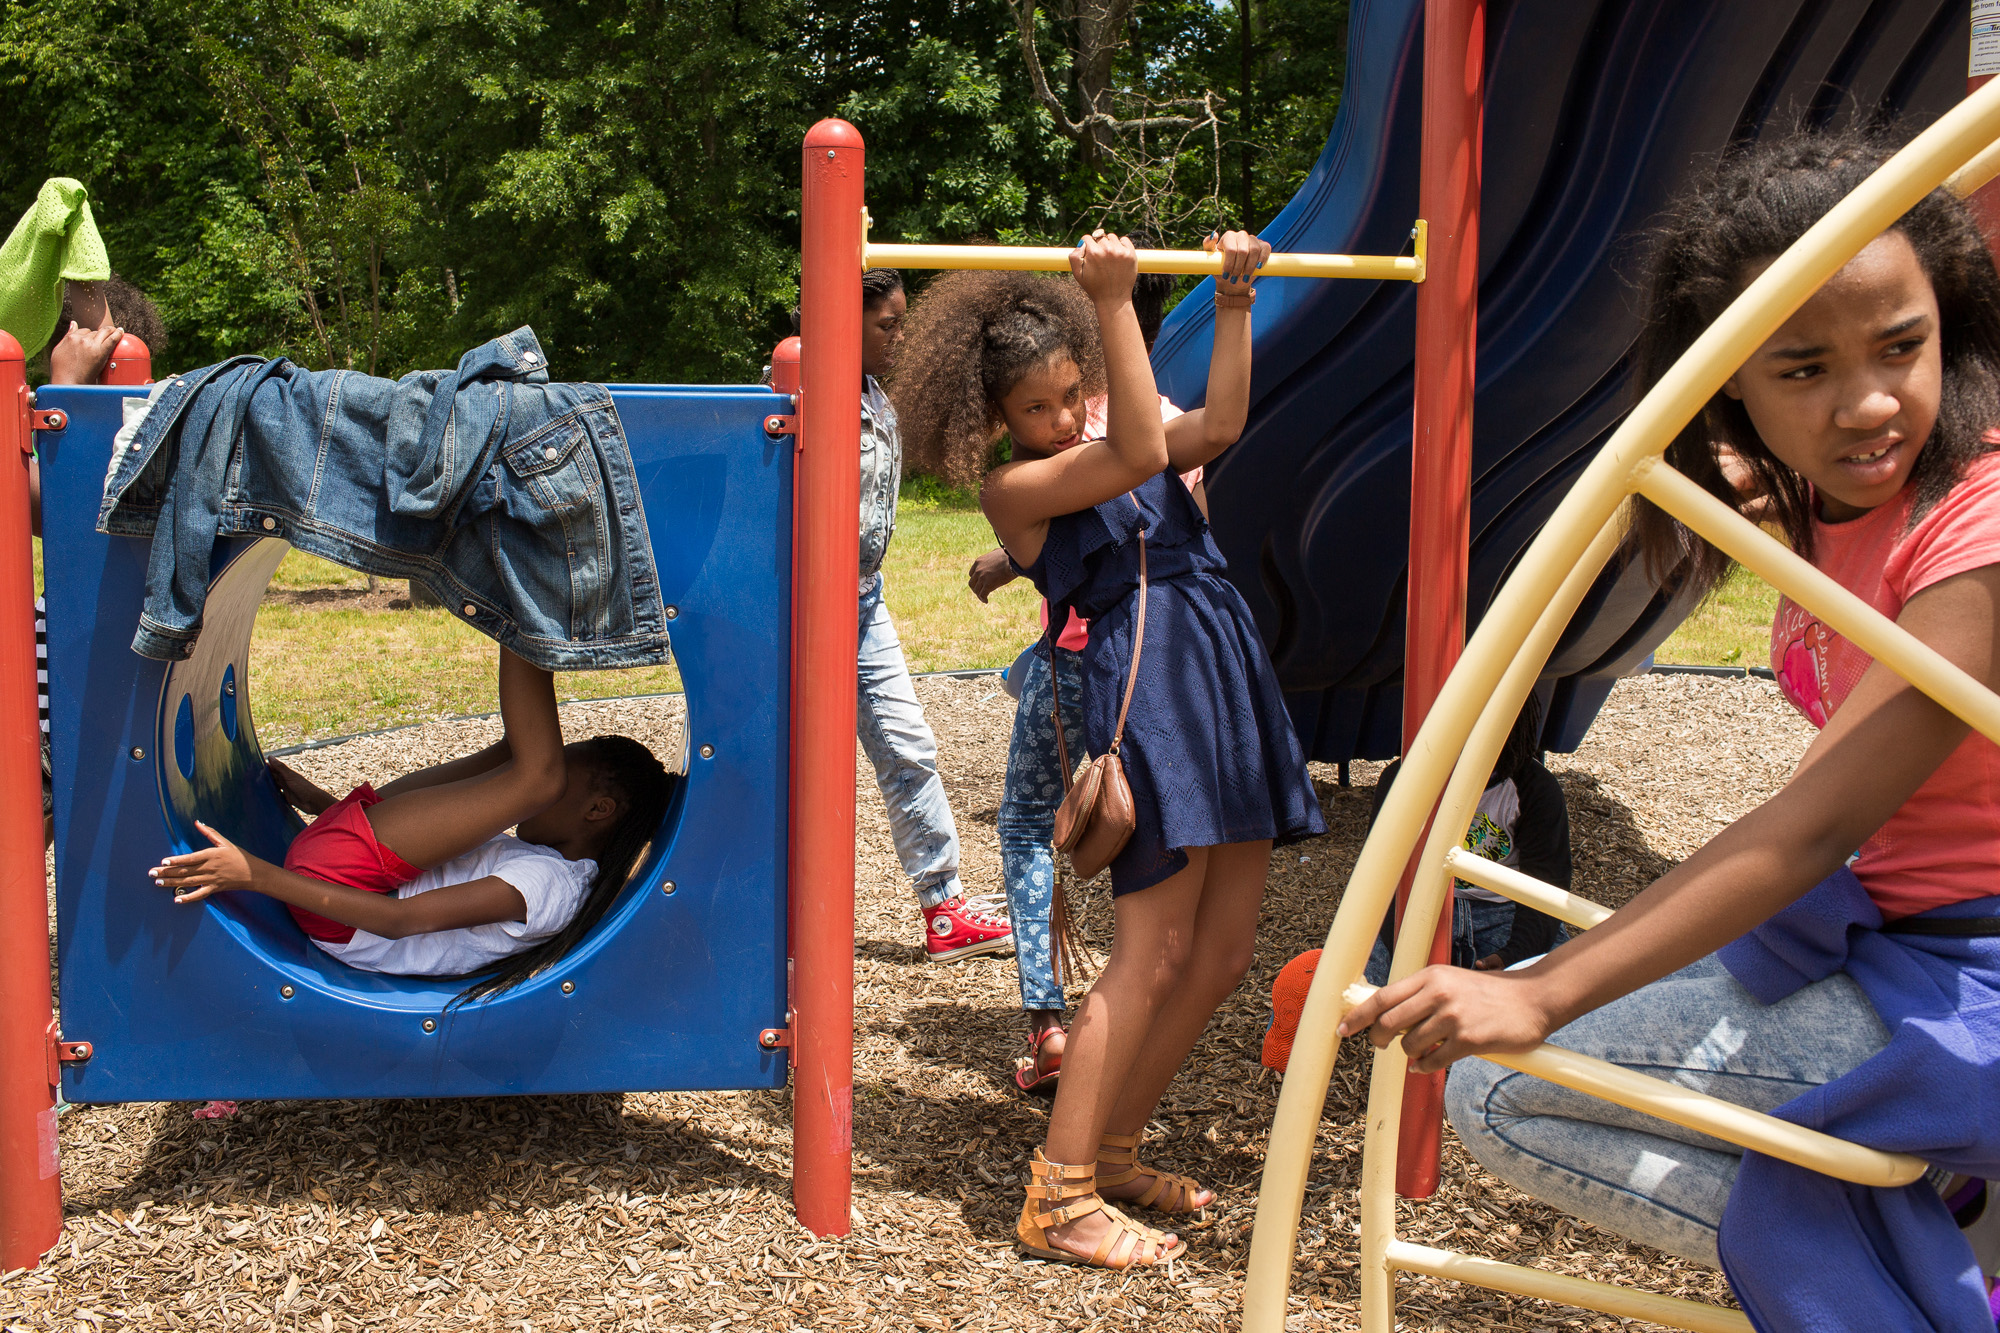  Fifth graders Karay Brevard, 11, (CENTER) and Laryah Goldsberry, 10, (FAR RIGHT) play on the playground Parkview Expressive Arts Magnet School in High Point, N.C.&nbsp; 